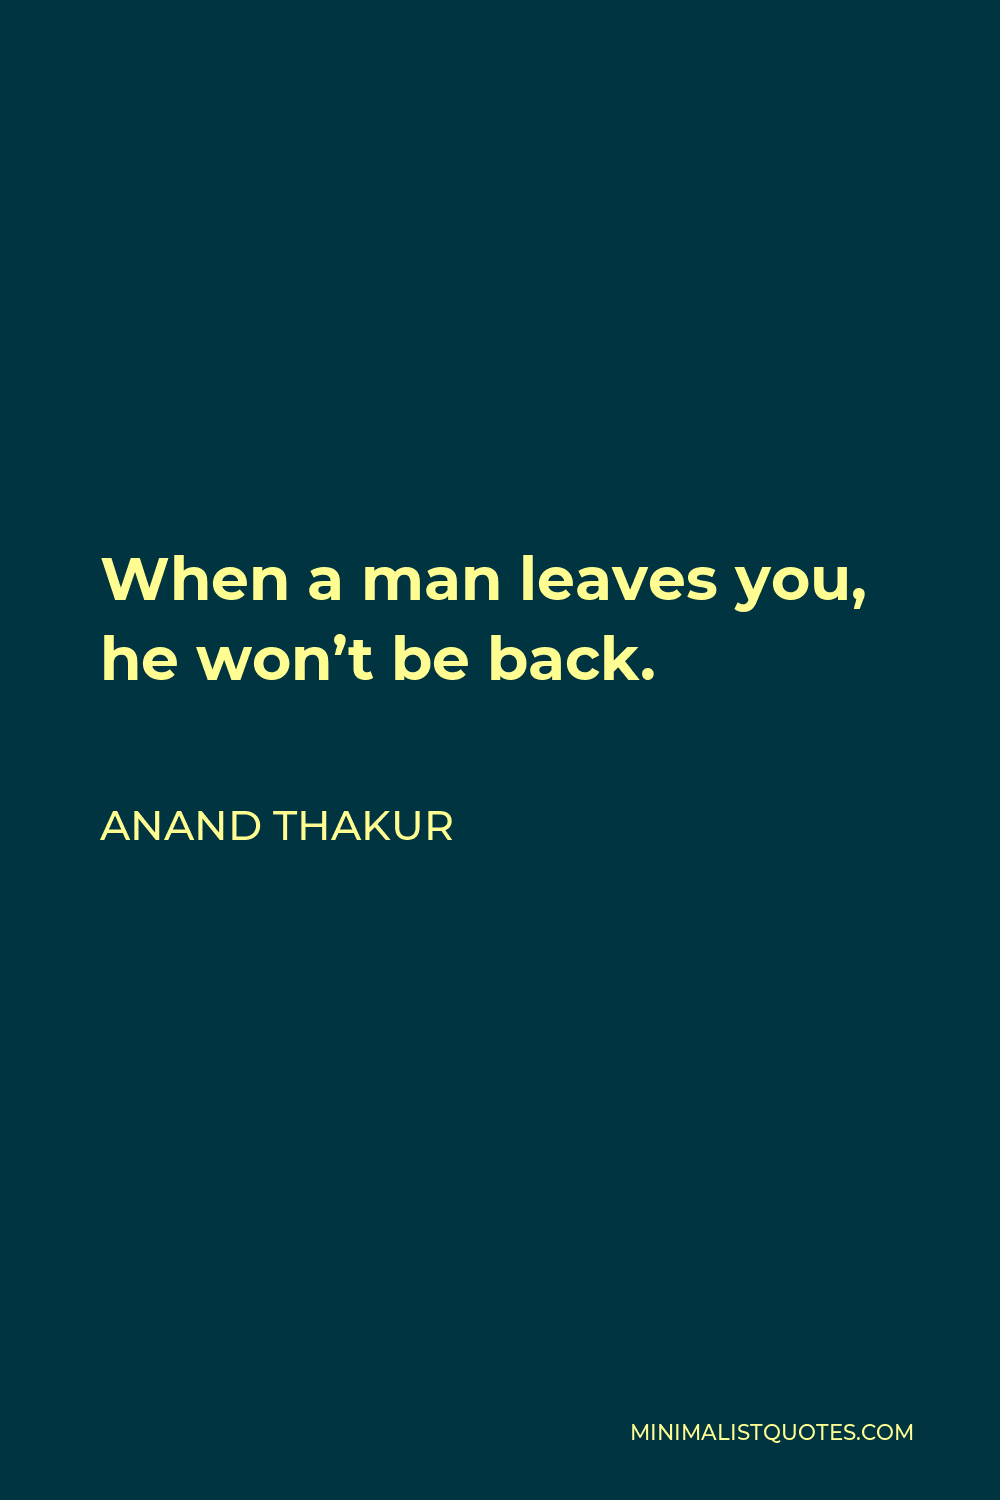 Anand Thakur Quote - When a man leaves you, he won’t be back.